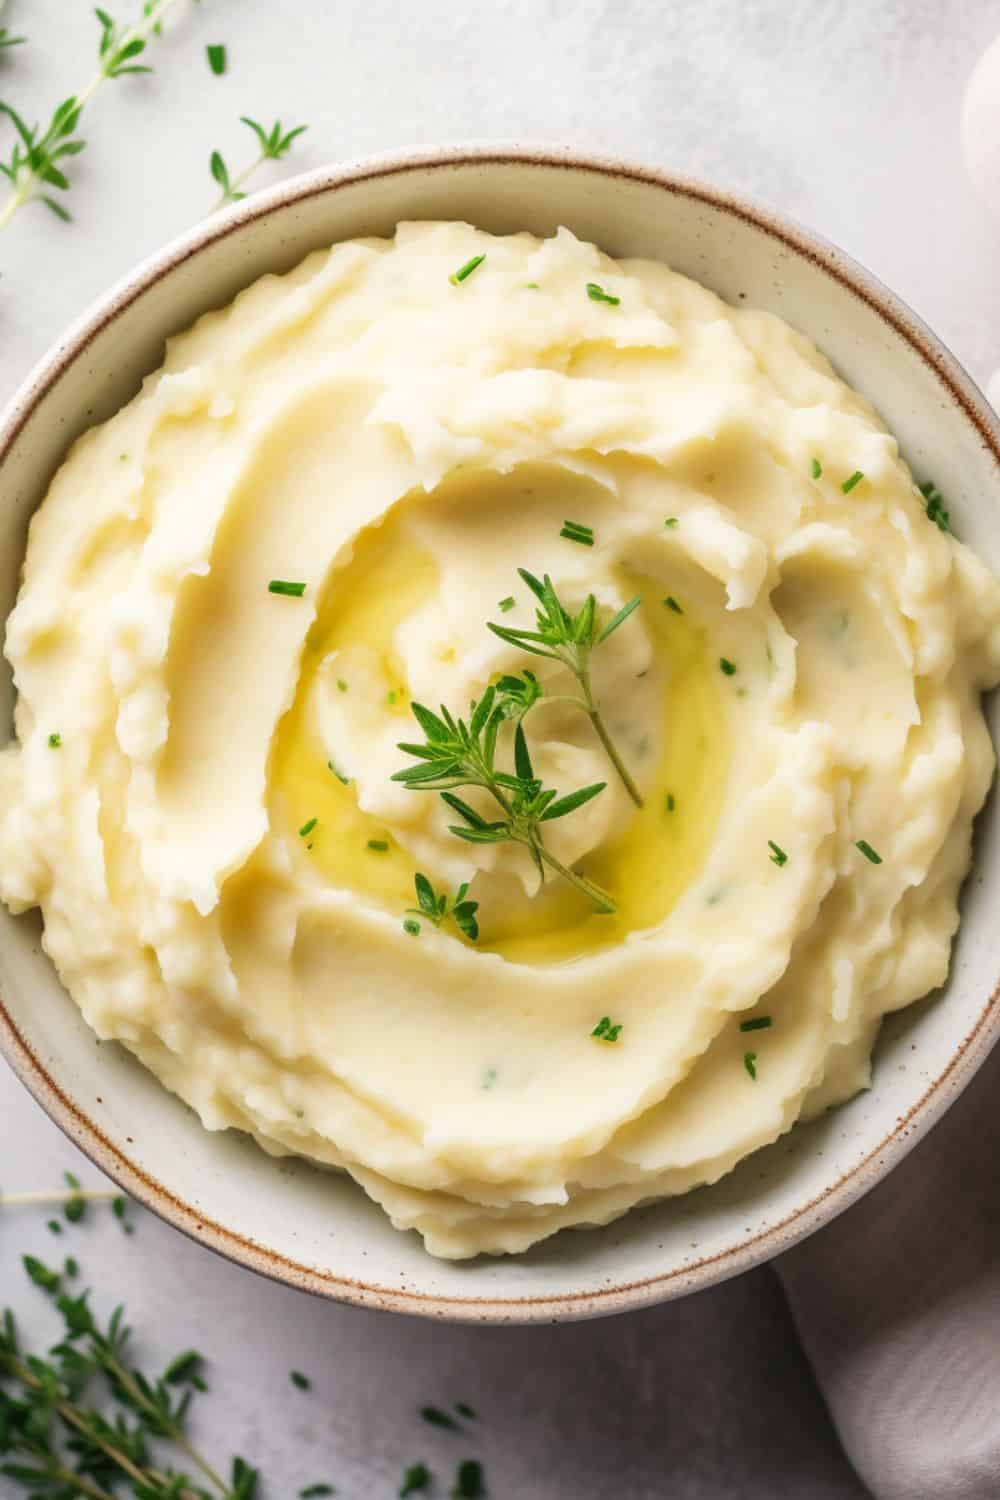 Top view of a bowl of creamy Instant Pot mashed potatoes garnished with chives and butter.